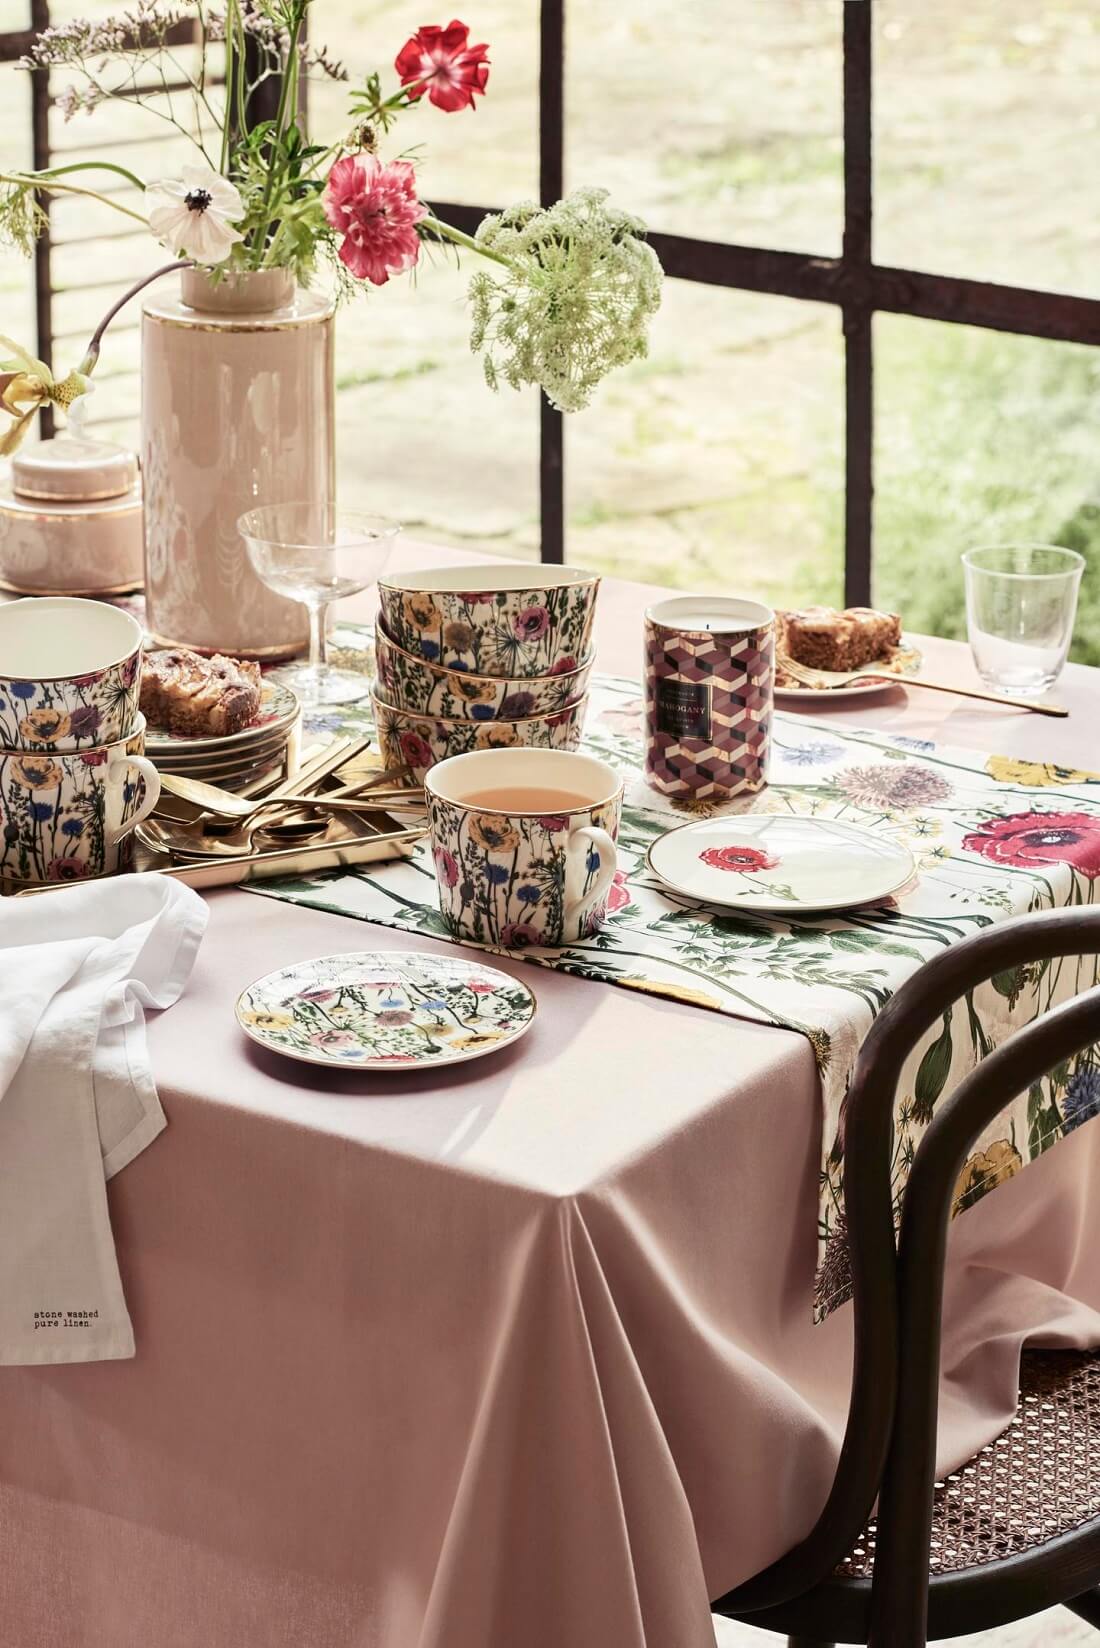 hm home spring collection 2019 nordroom5 Floral Patterns and Pastel Colors in the H&M Home Spring Collection